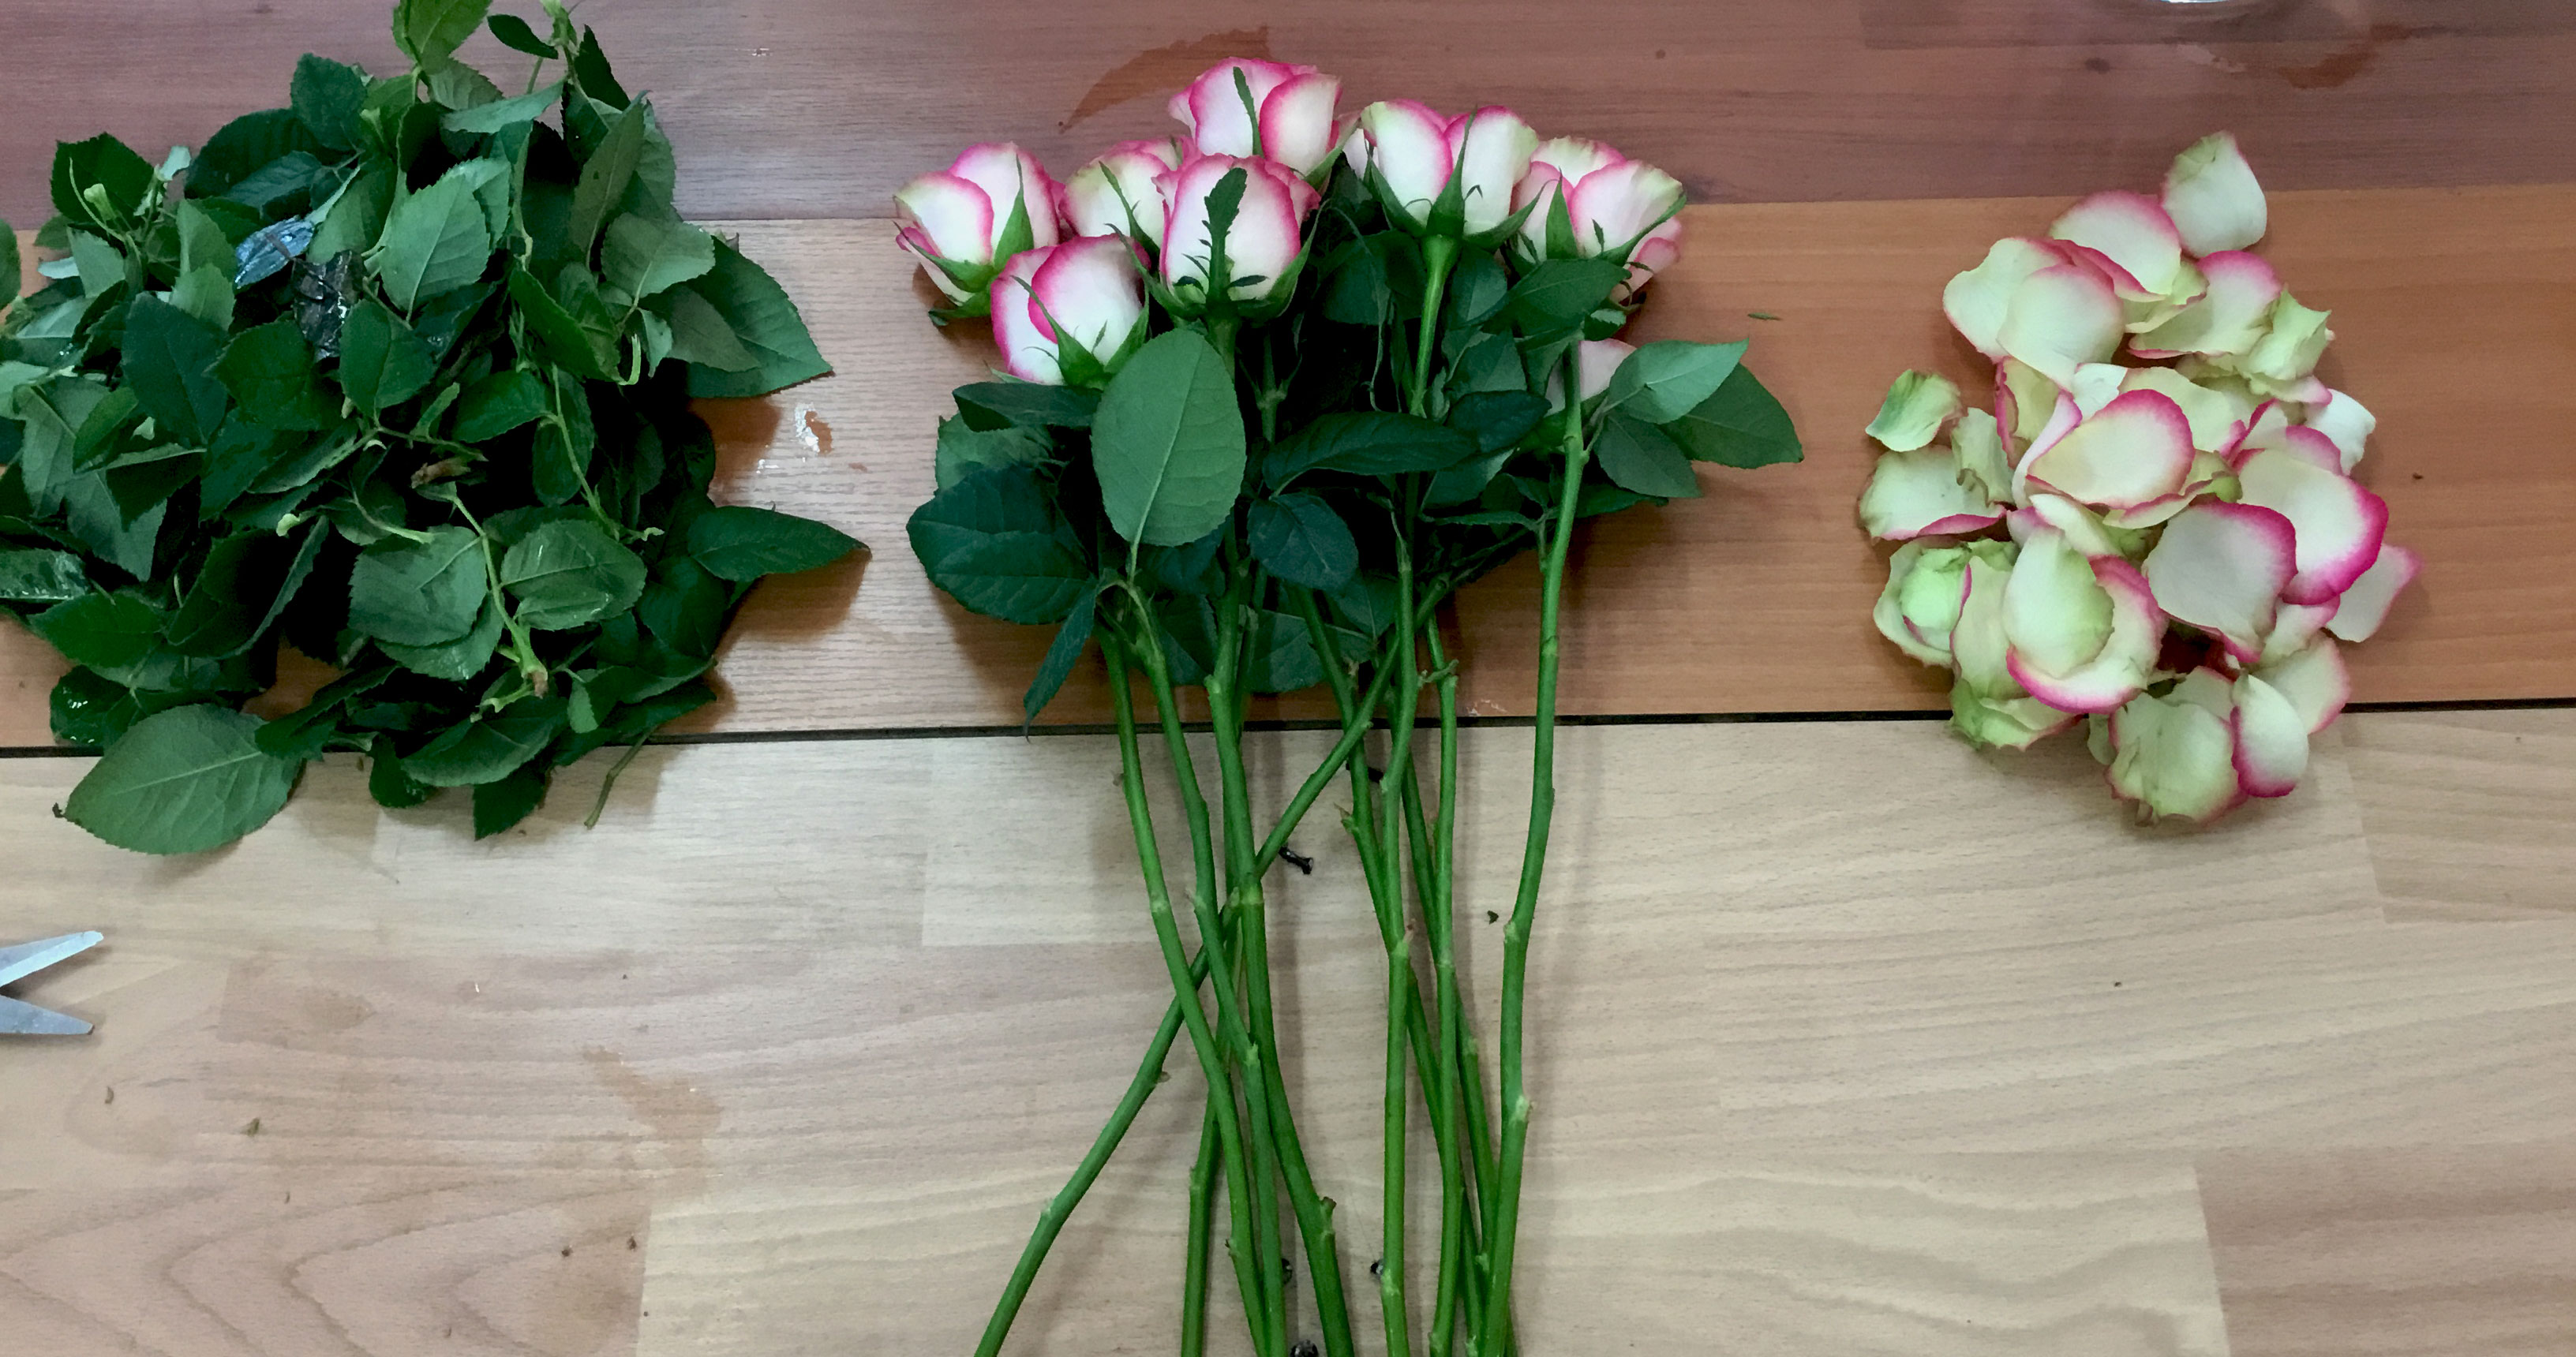 Tuto : Comment conserver mes roses ?